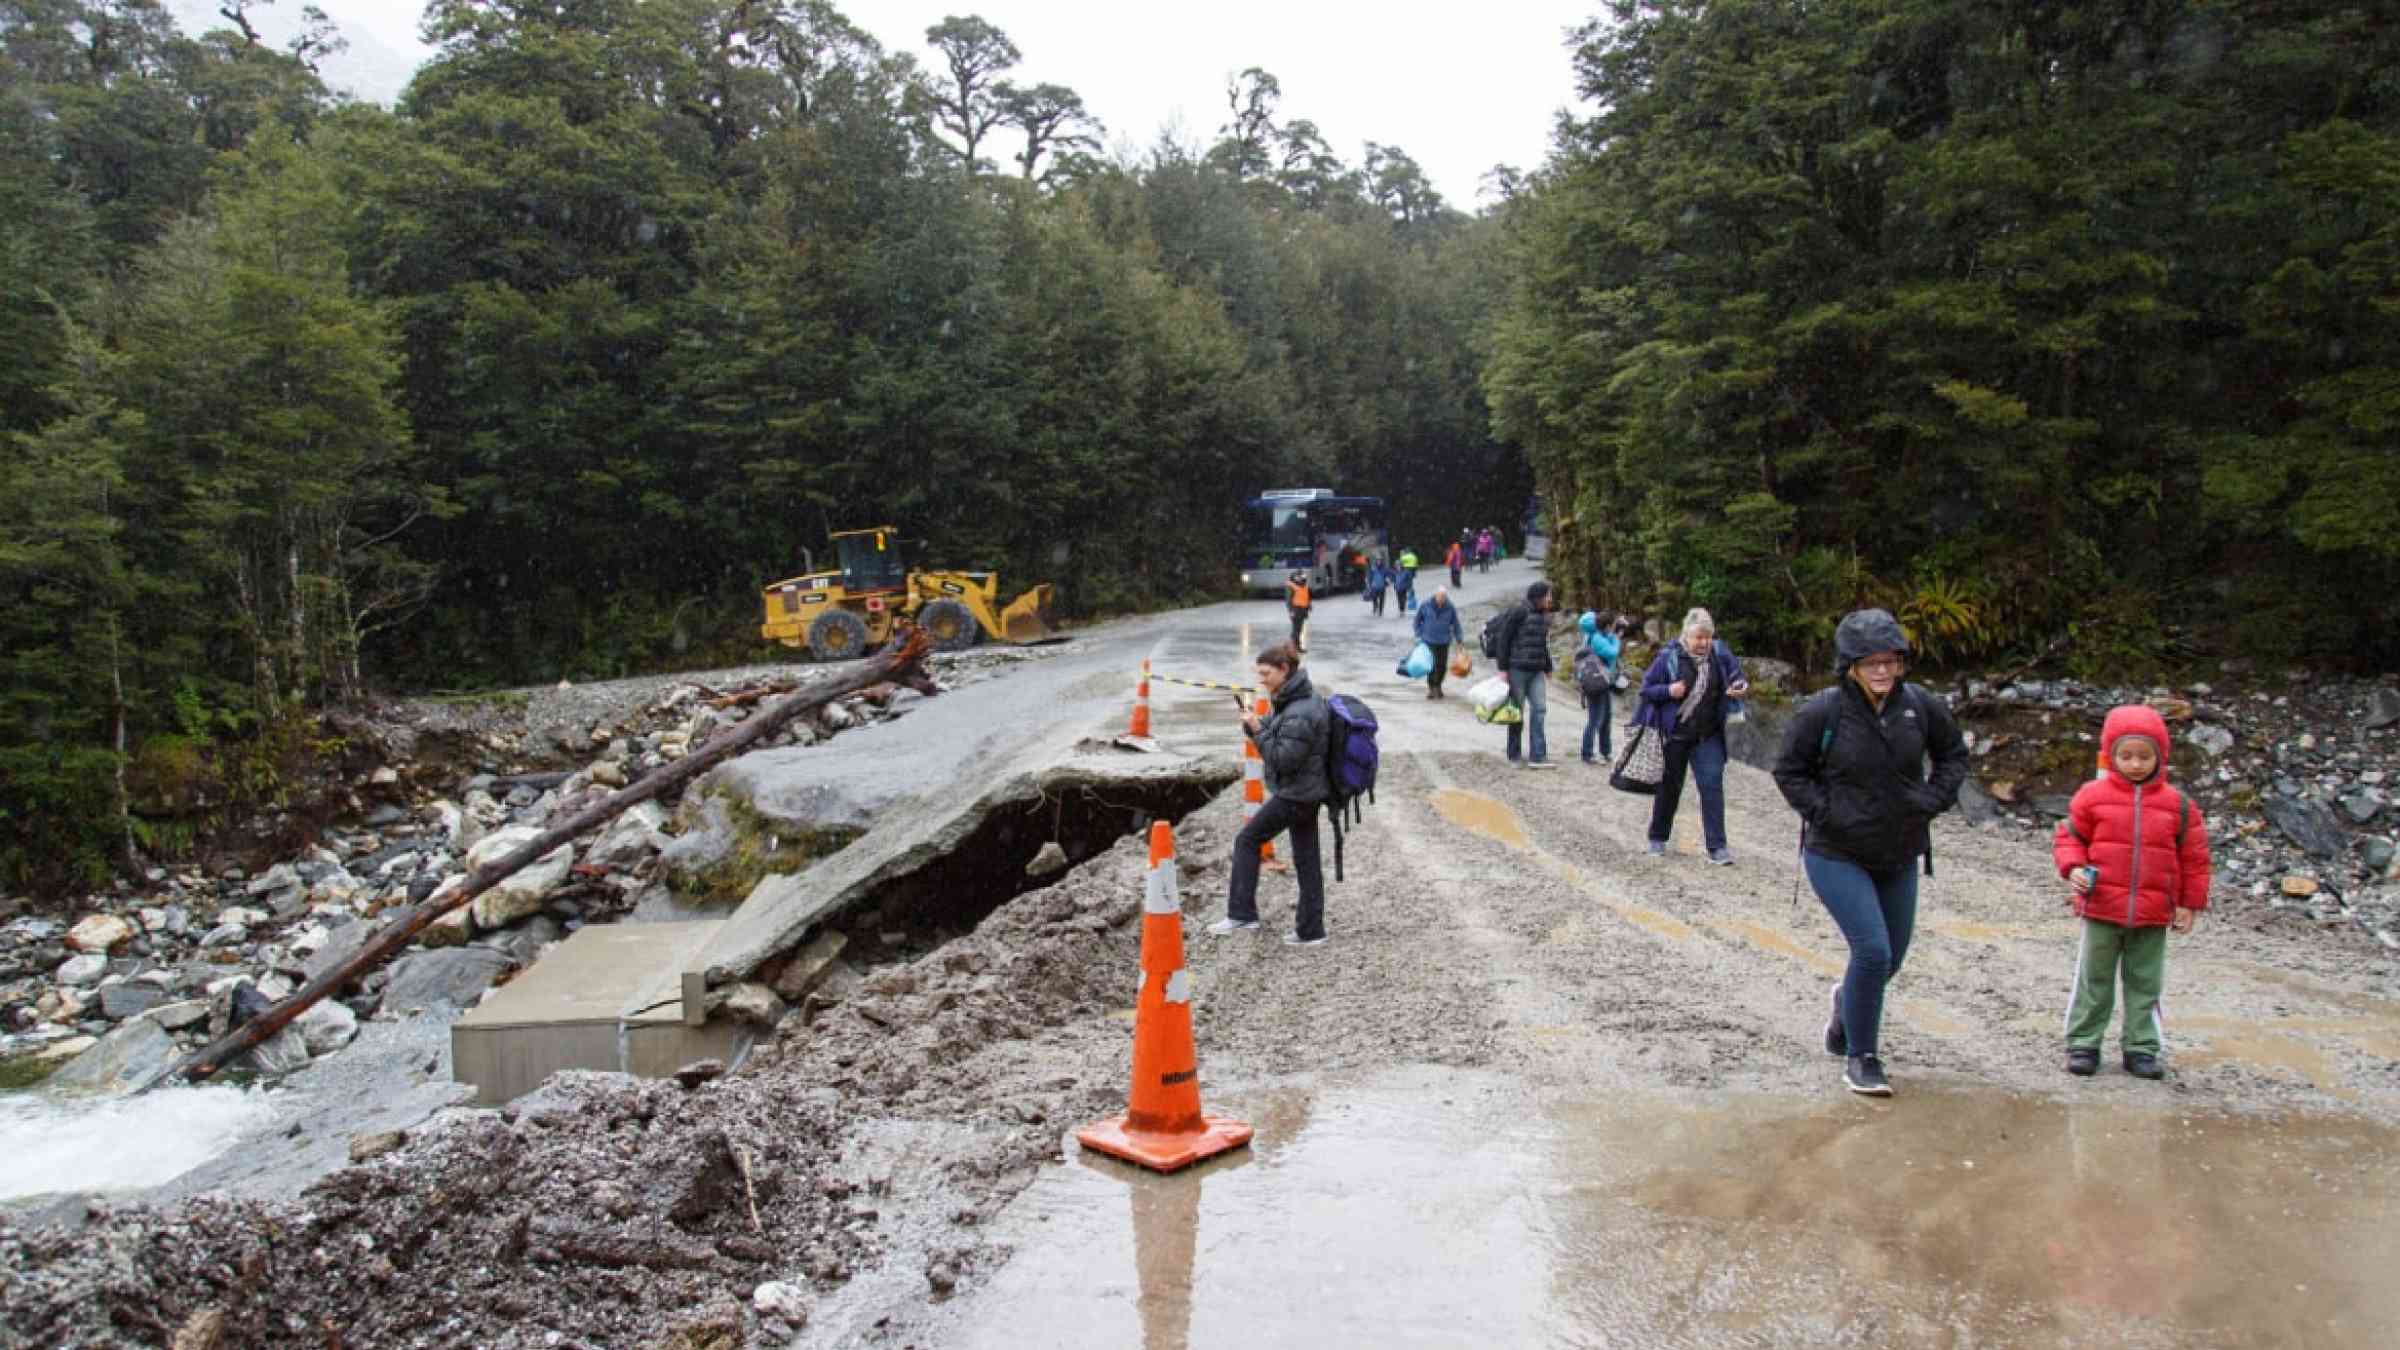 People walk along the road because the road has been washed away by torrential rain causing flooding and road collapse.